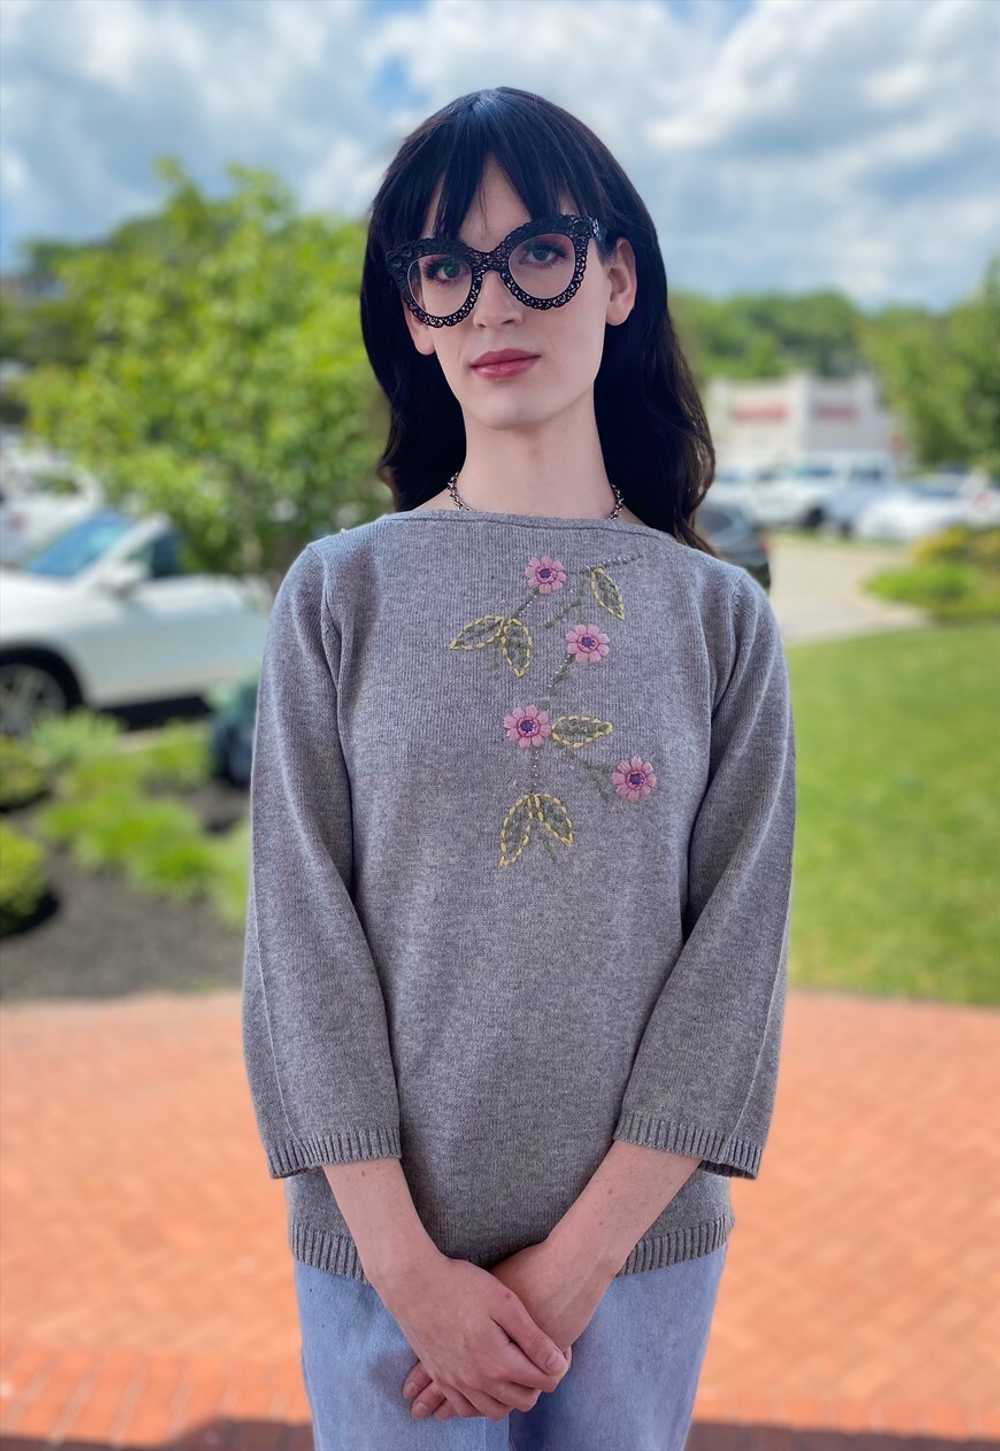 New Vintage 90s Sweater with Floral Embroidery. - image 1